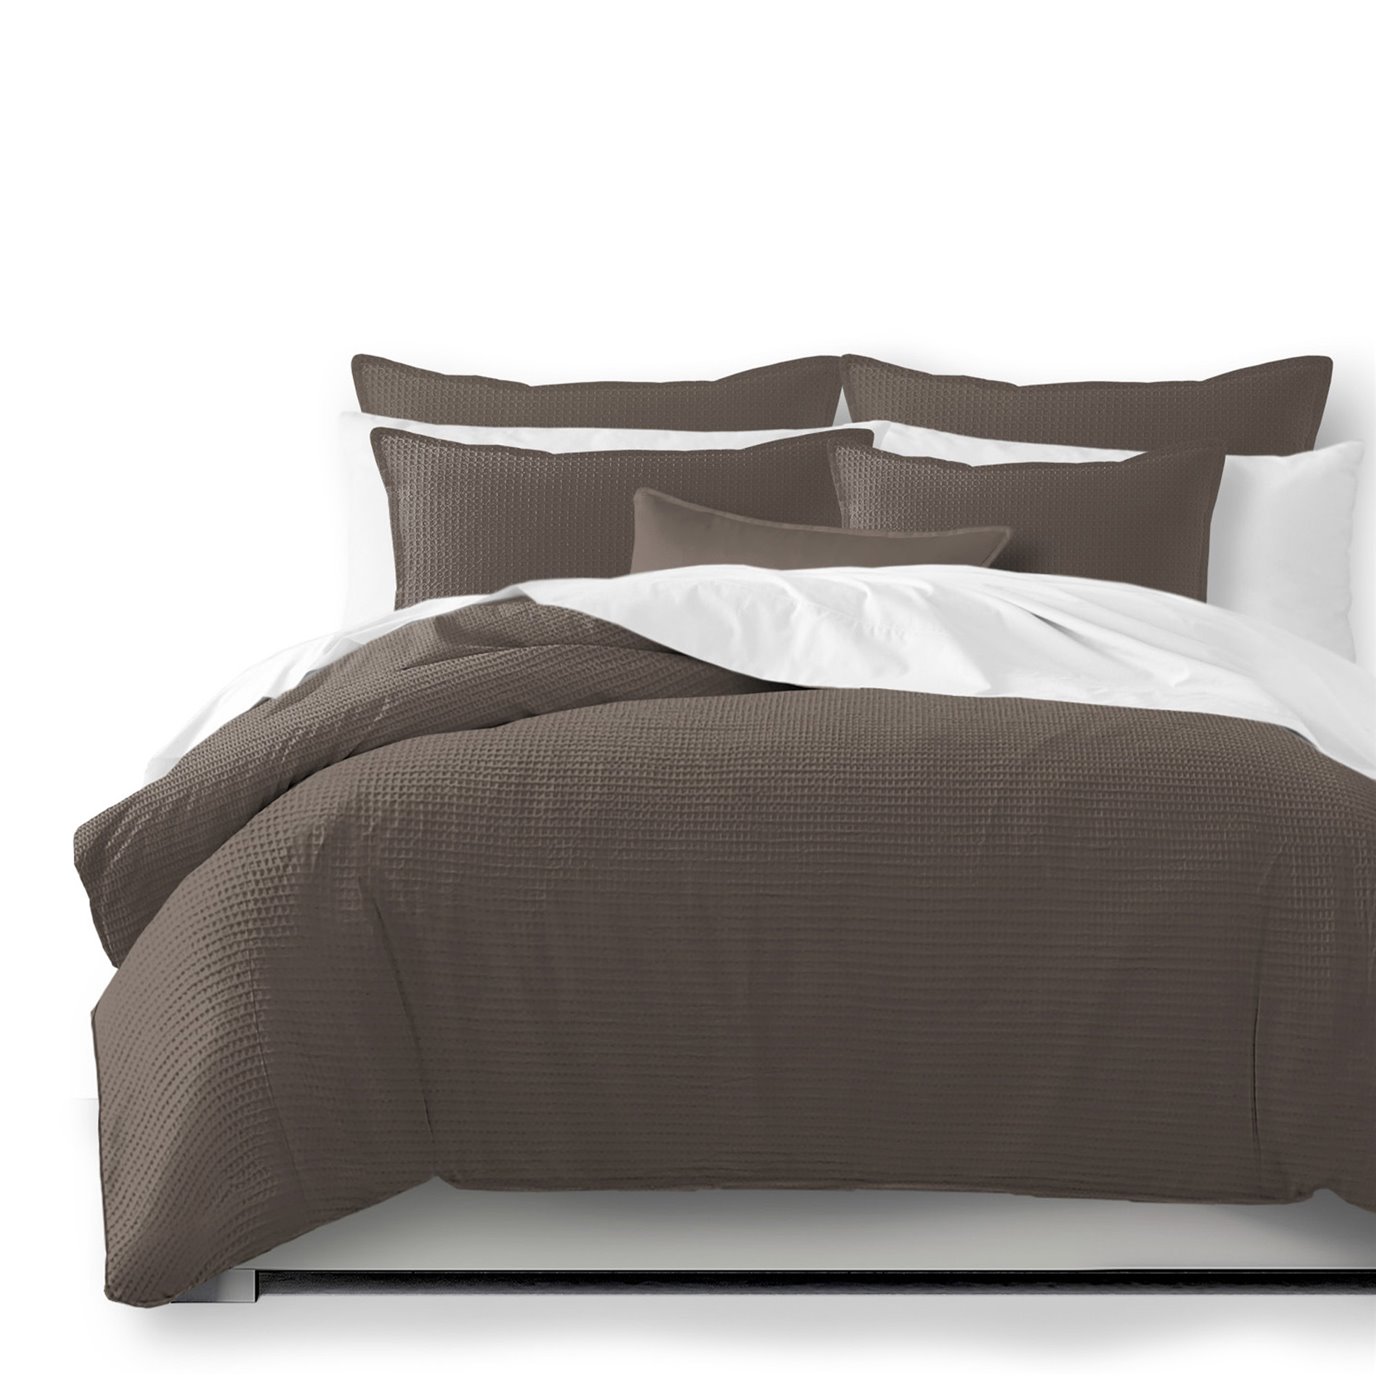 Classic Waffle Mocca Coverlet and Pillow Sham(s) Set - Size King / California King